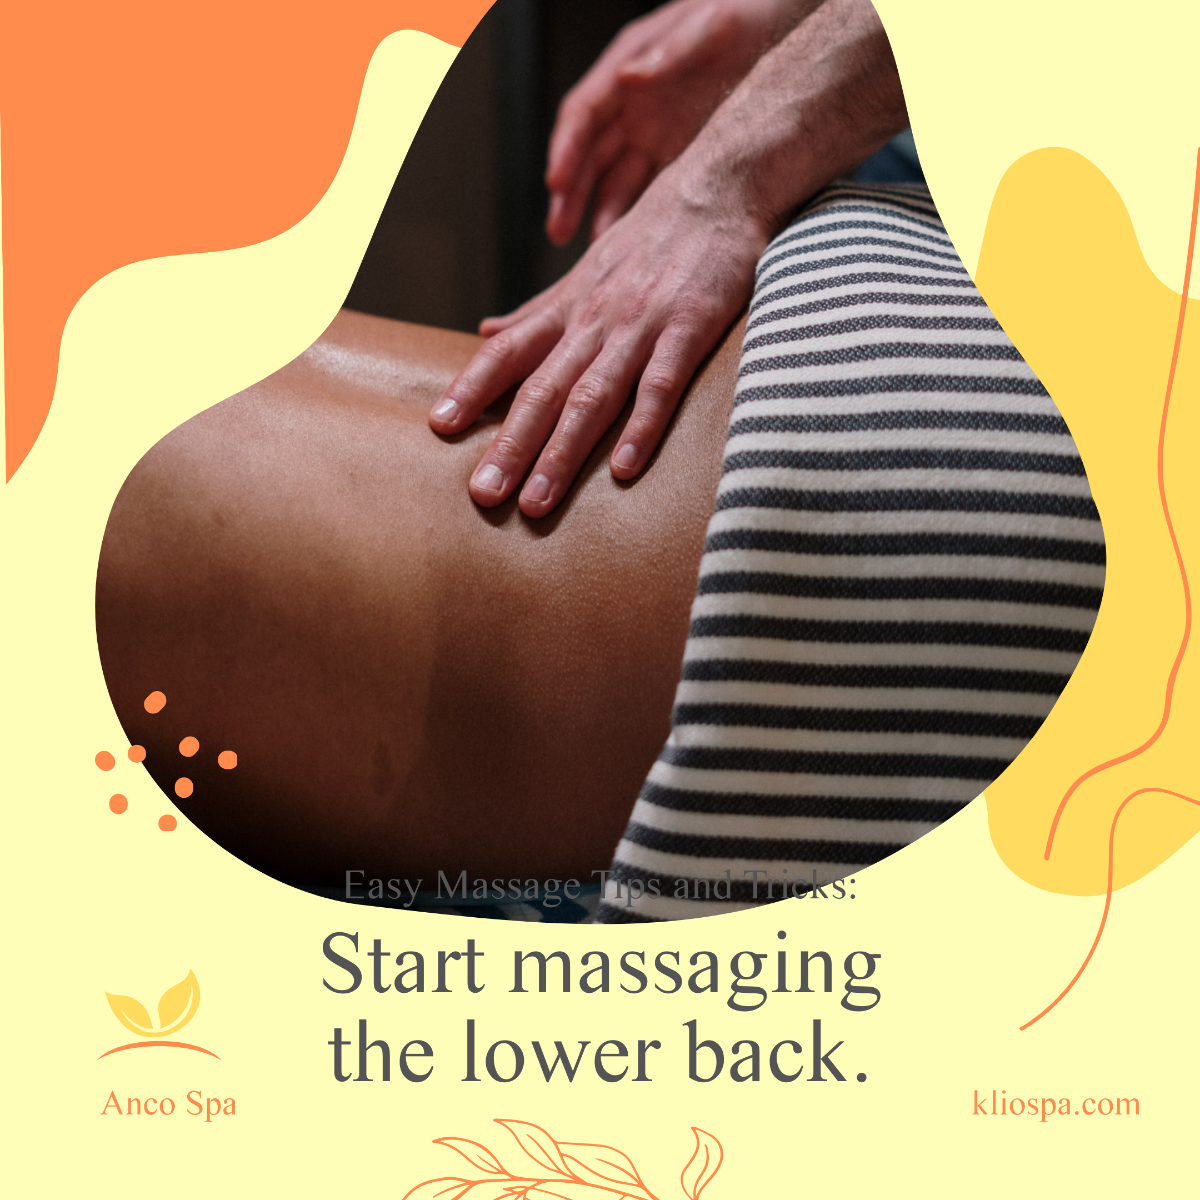 Easy Massage Tips And Tricks Post, Instagram, Facebook Template